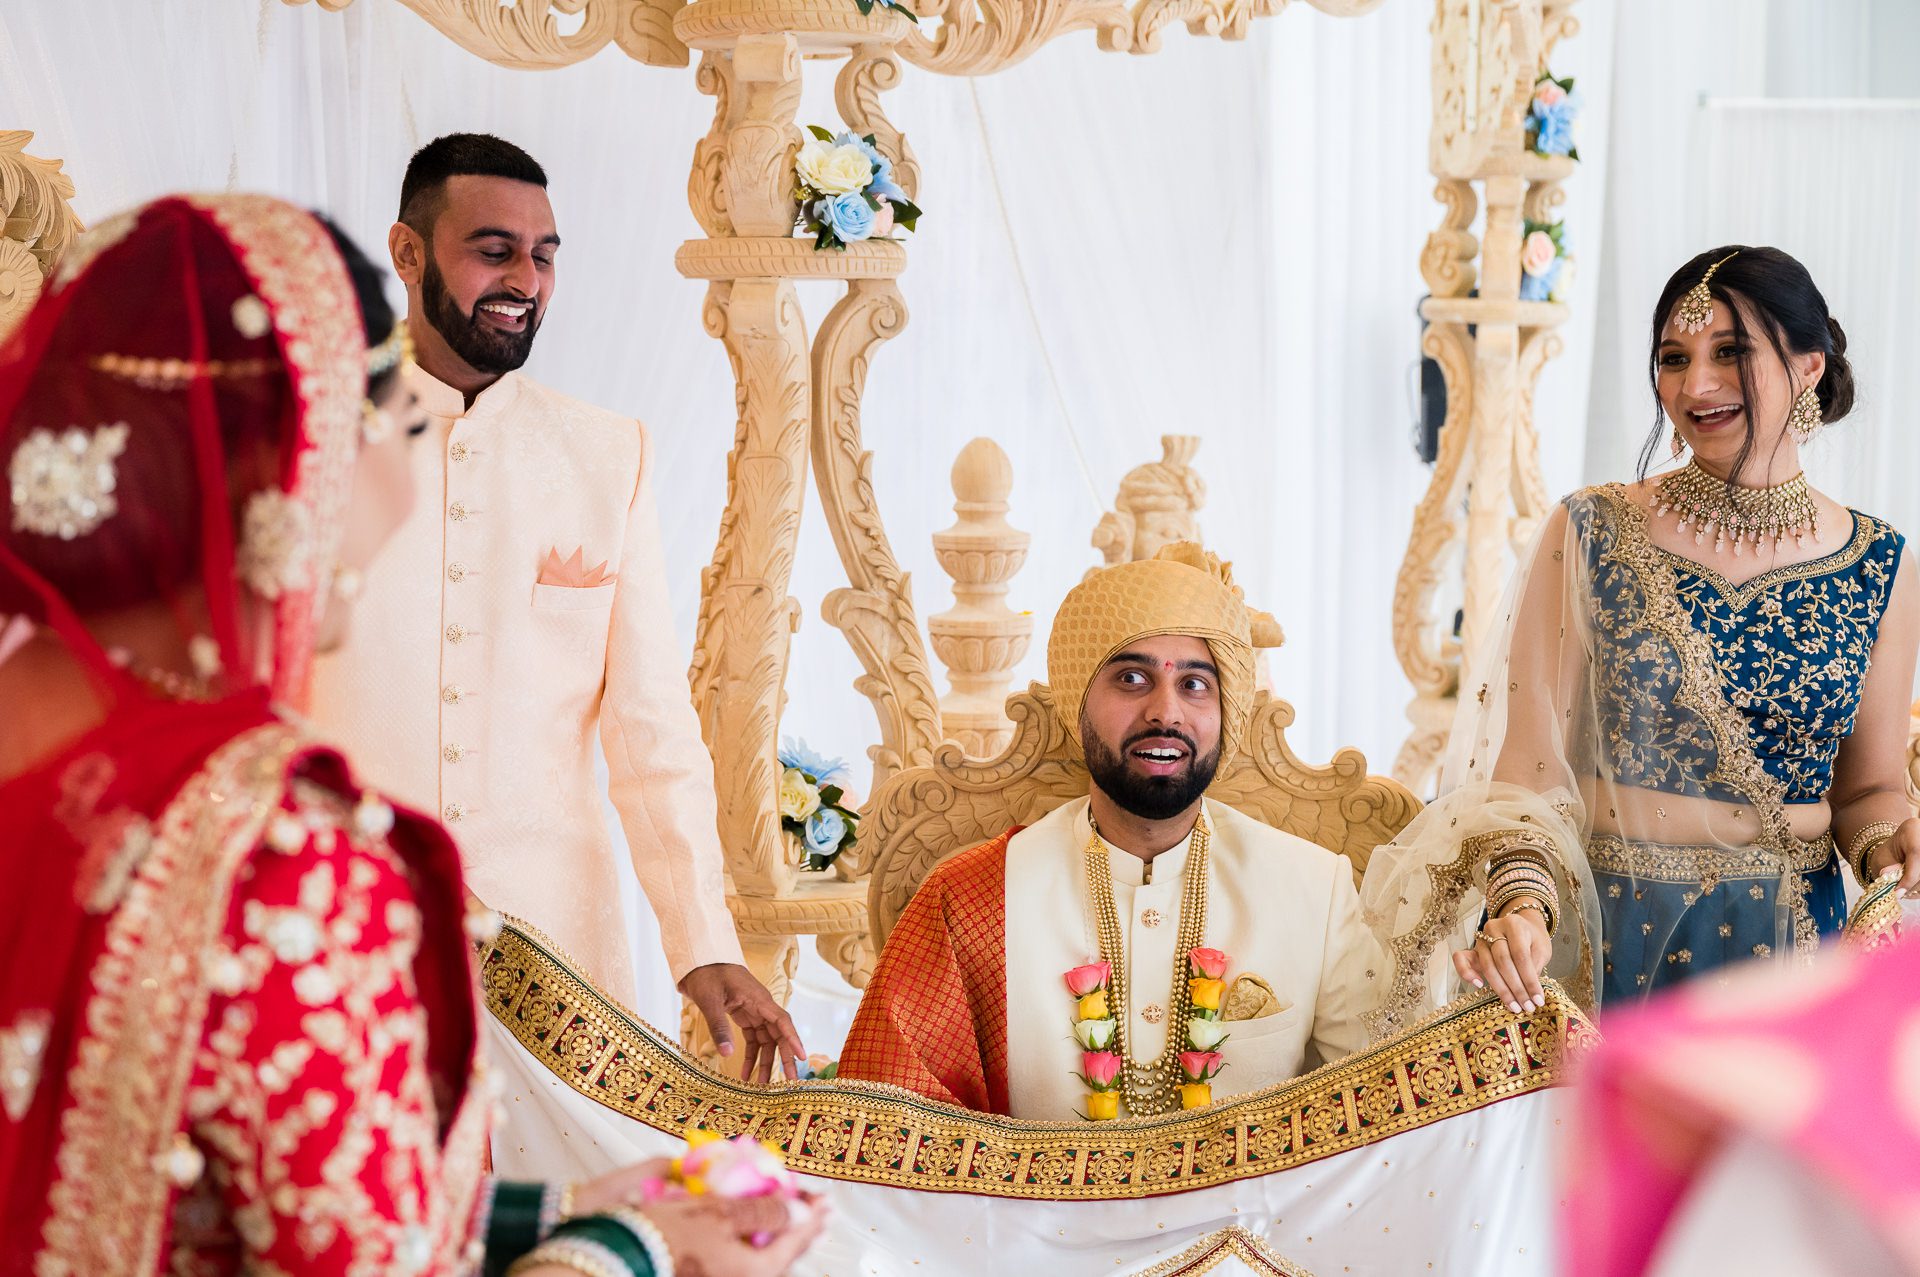 Groom's reaction to seeing the bride